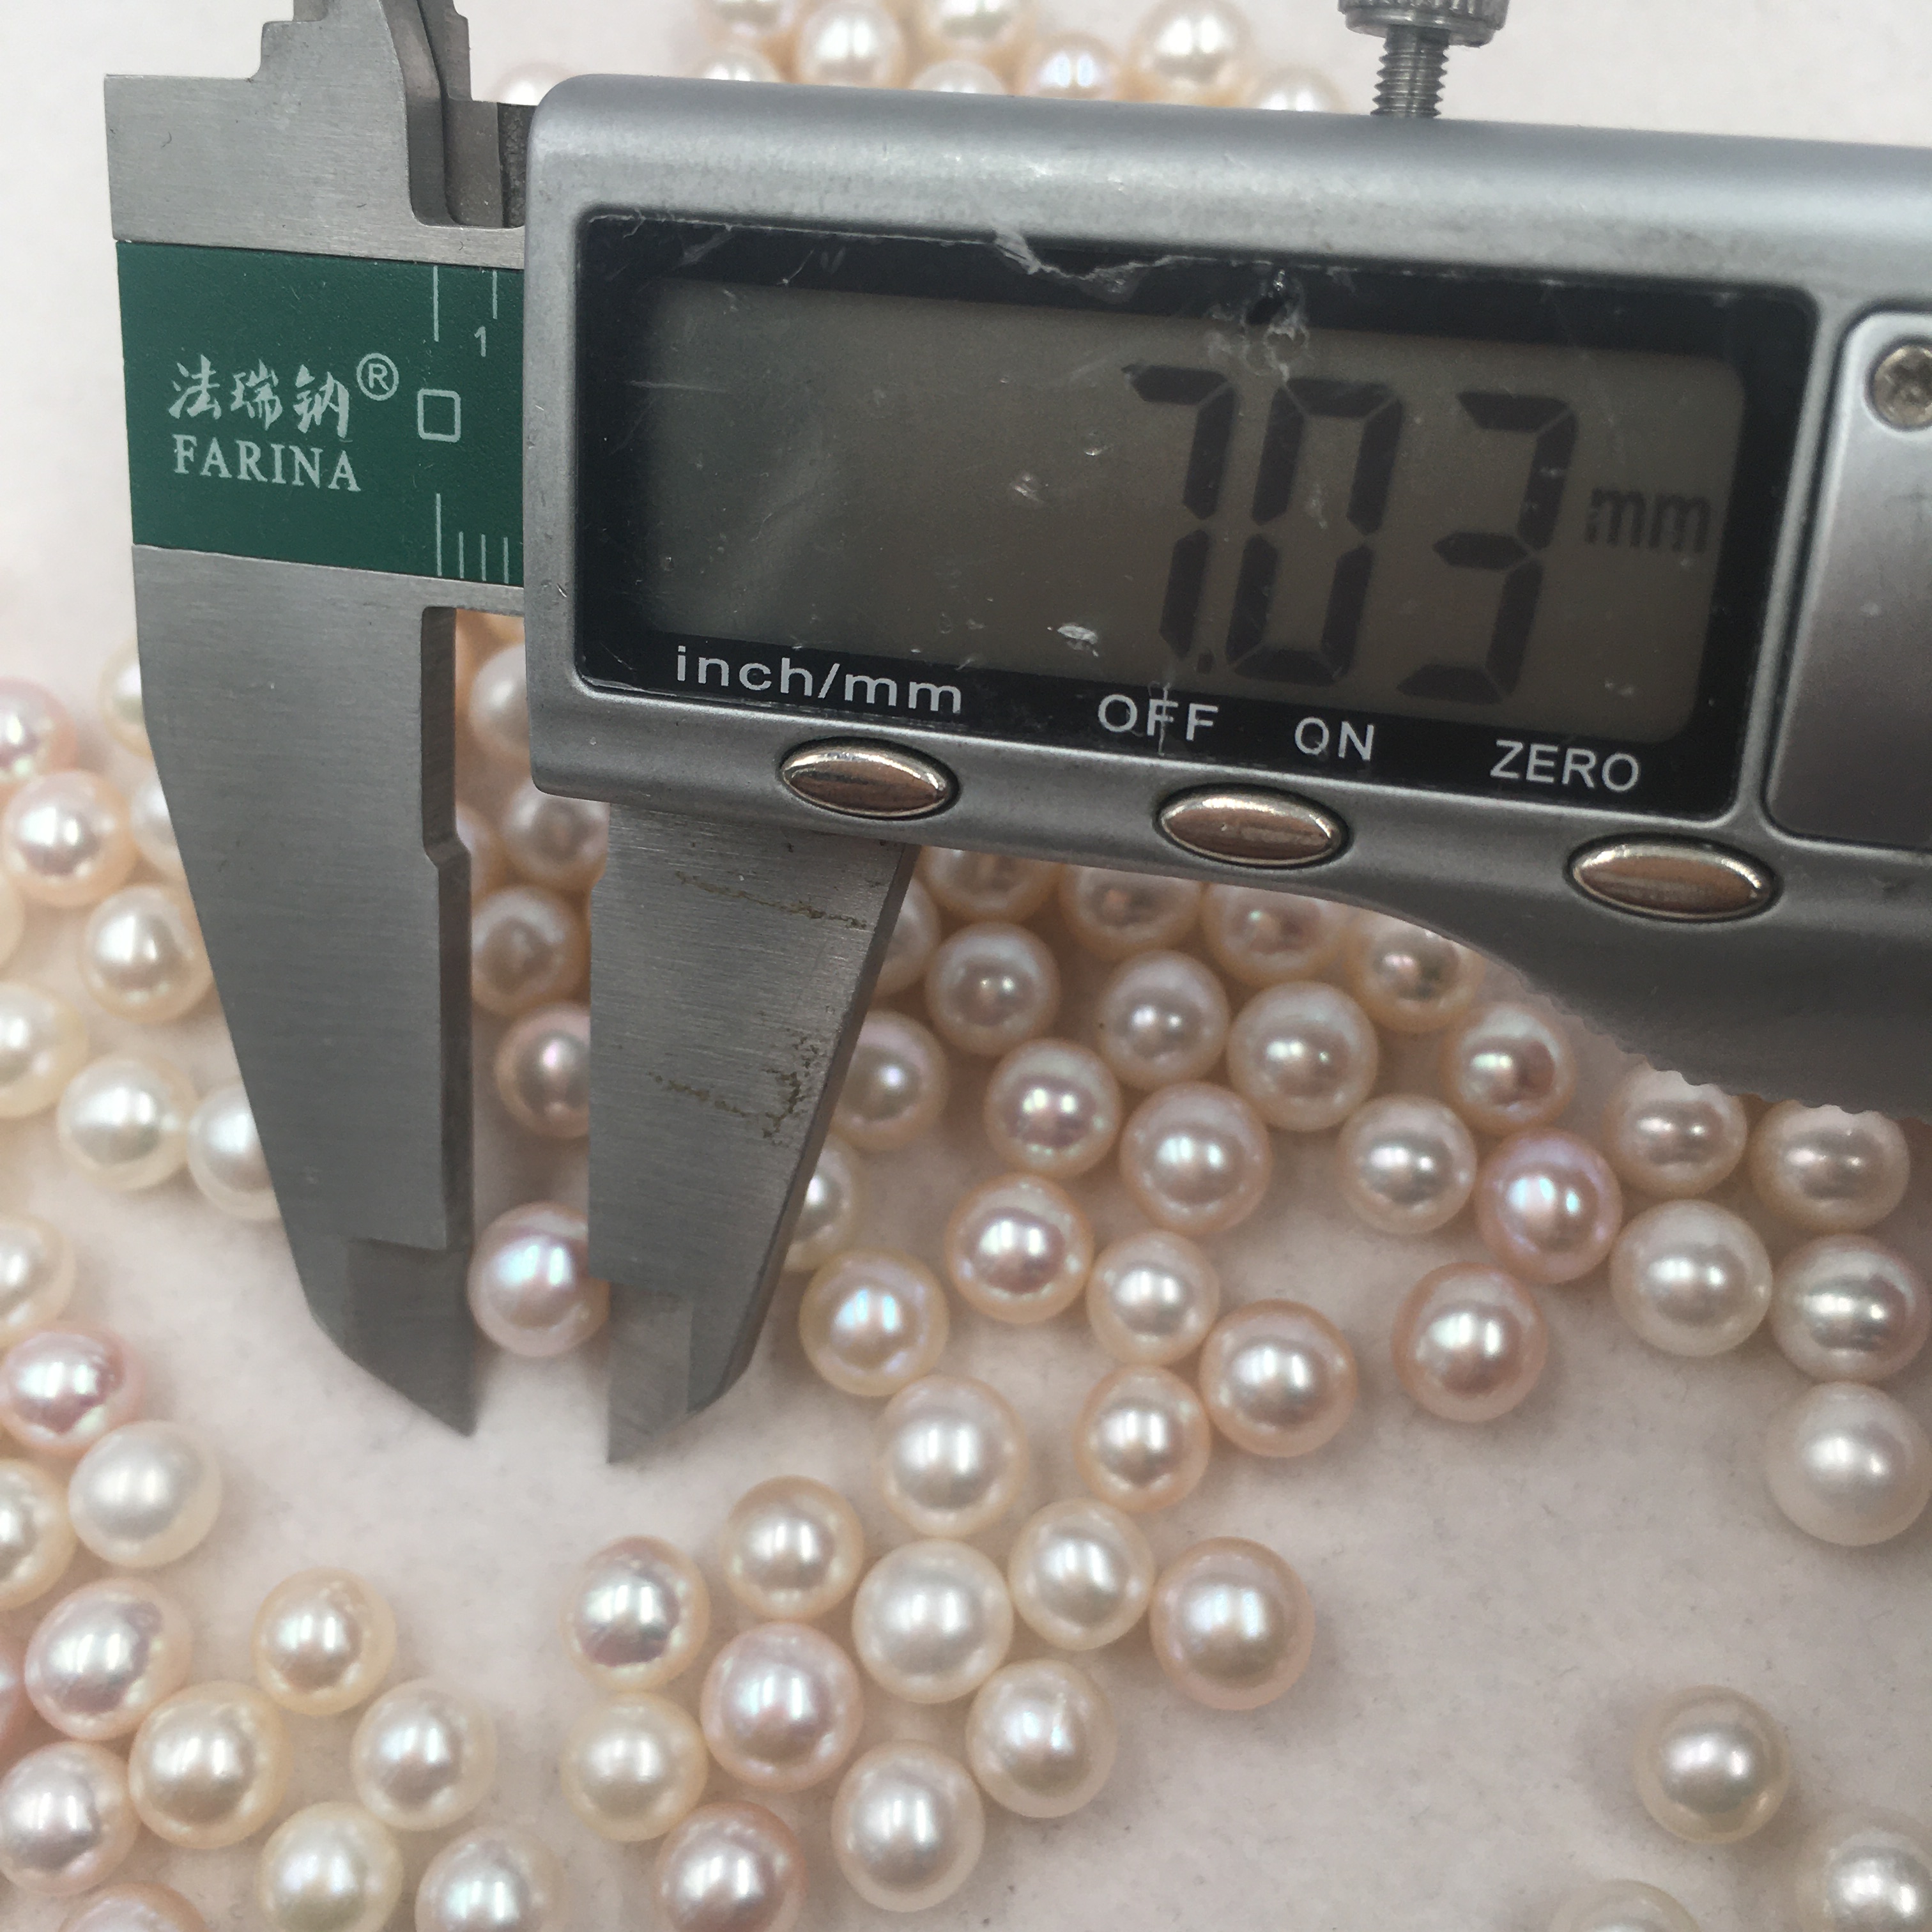 6.5-7.5 mm DIY Freshwater Pearls Wholesale, high quality AAA white round pearl nature loose freshwater pearl,half or no hole